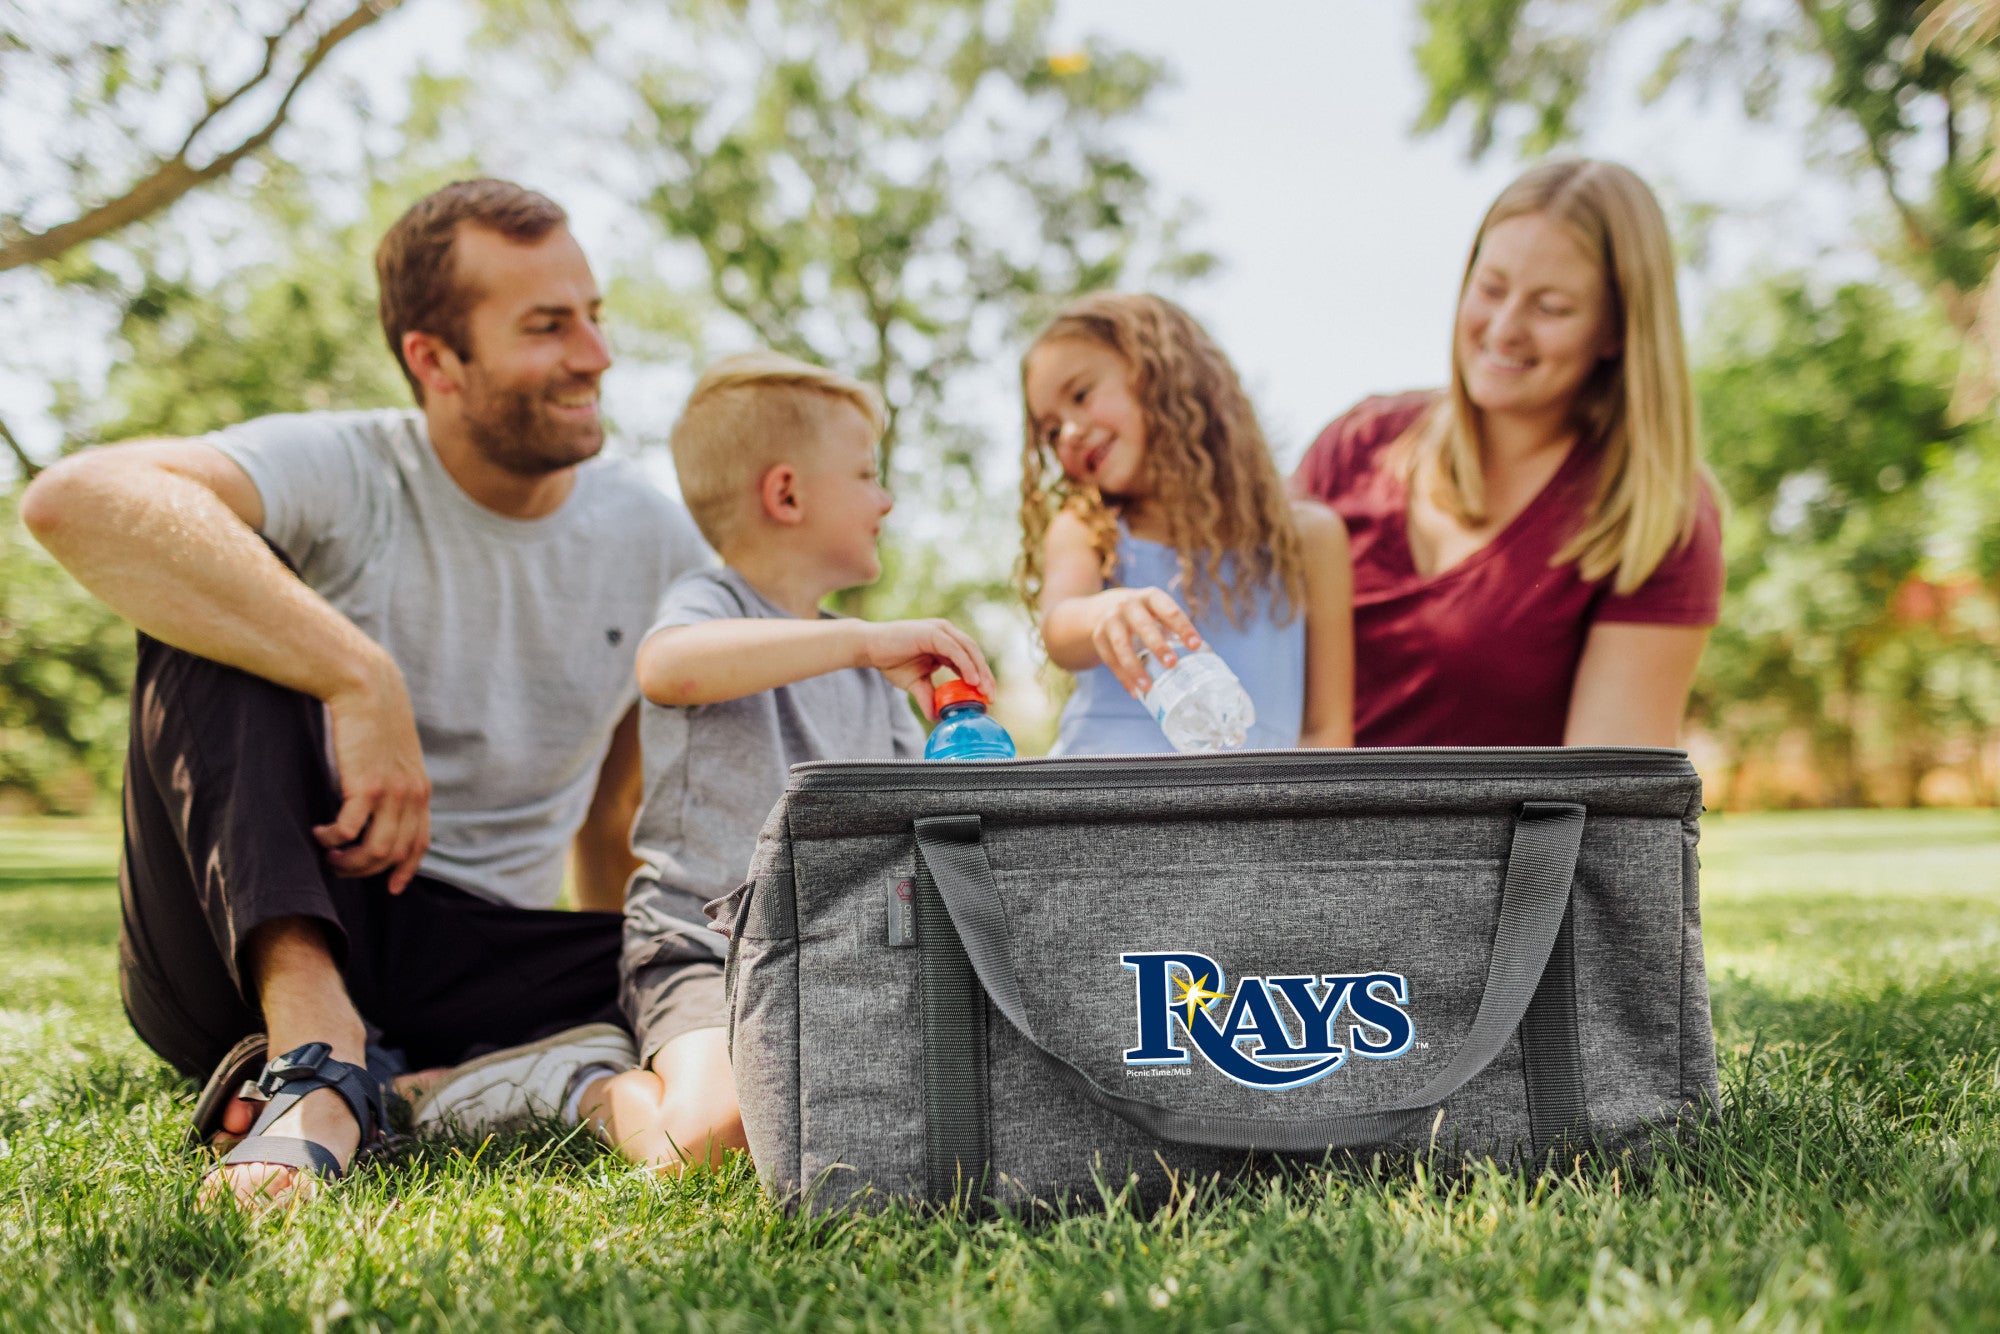 Tampa Bay Rays - 64 Can Collapsible Cooler